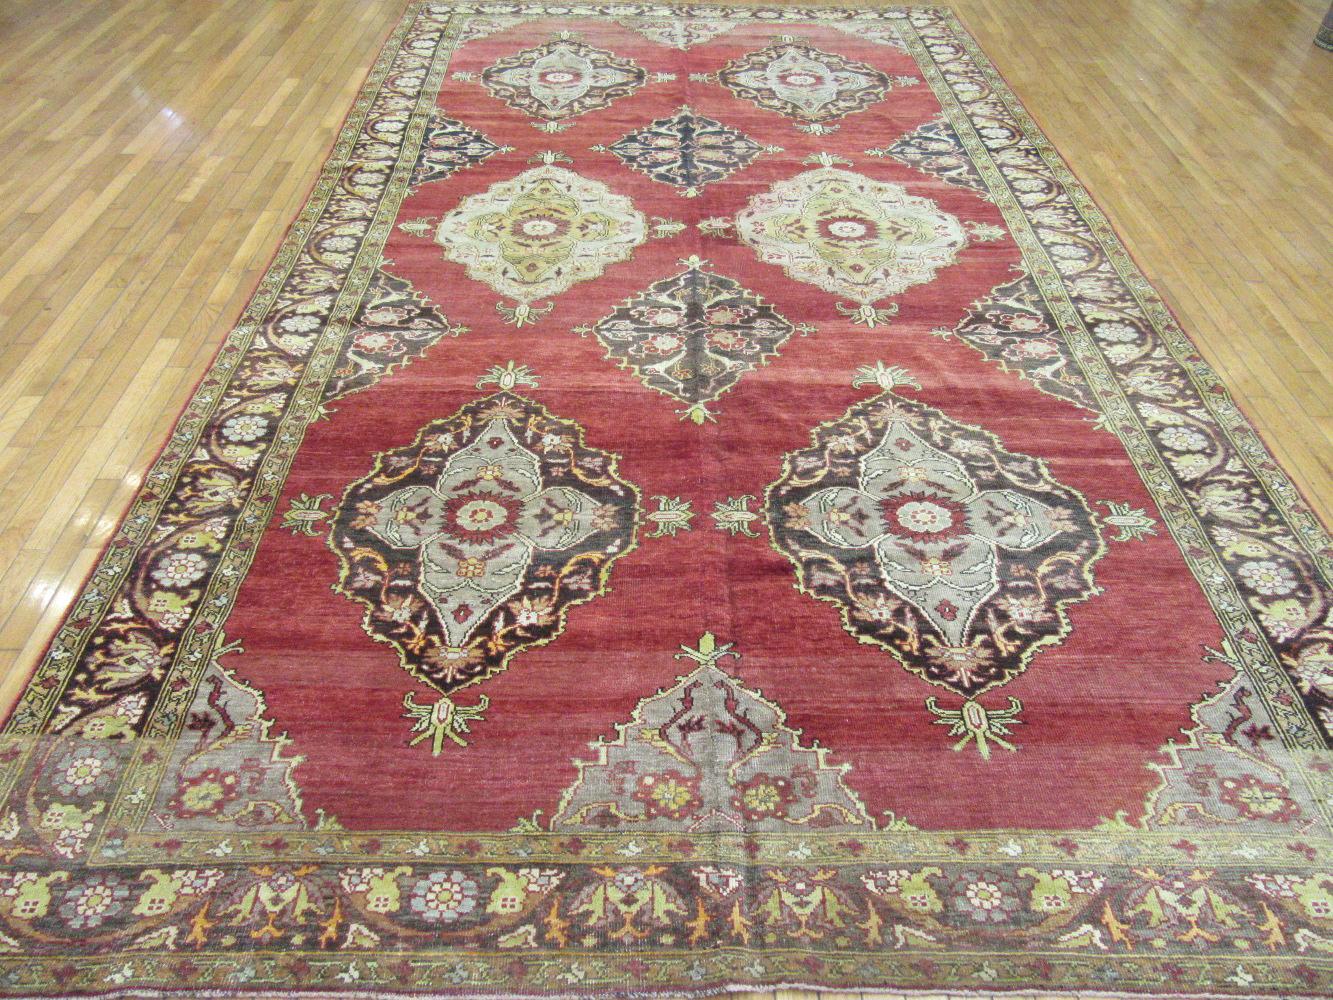 This is a hand-knotted vintage Anatolian Oushak rug from Turkey. It is made with durable Turkish wool and natural dyes. The rug has a flexible all-over pattern to be used almost anywhere in your home or office. It measures 7' 10'' x 13' 8''.